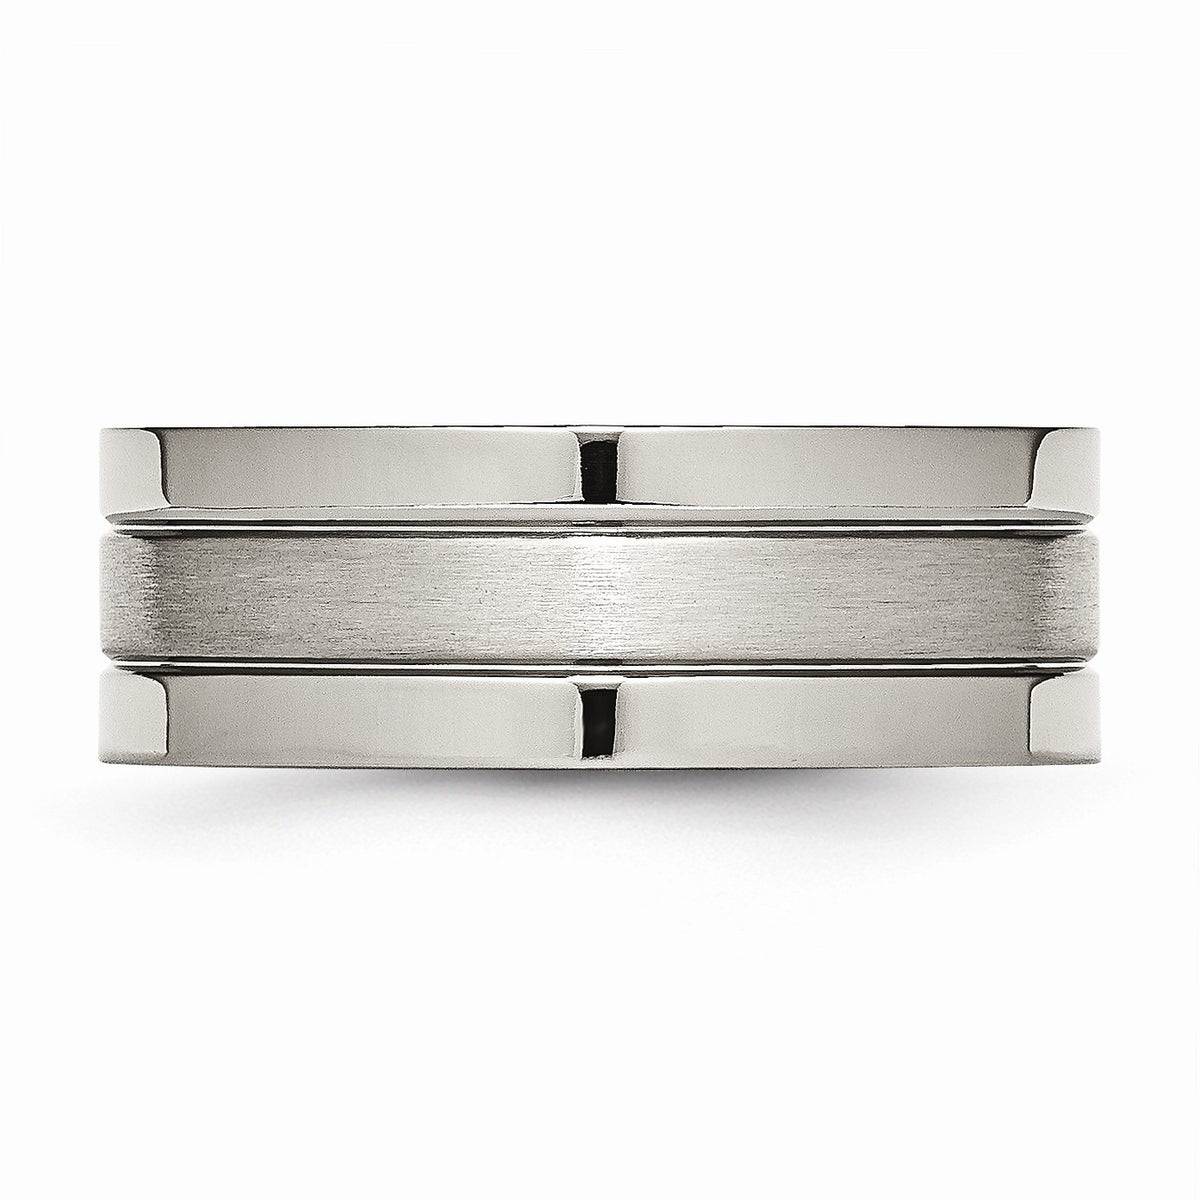 Alternate view of the Titanium, 8mm Dual Finish Flat Unisex Comfort Fit Band by The Black Bow Jewelry Co.